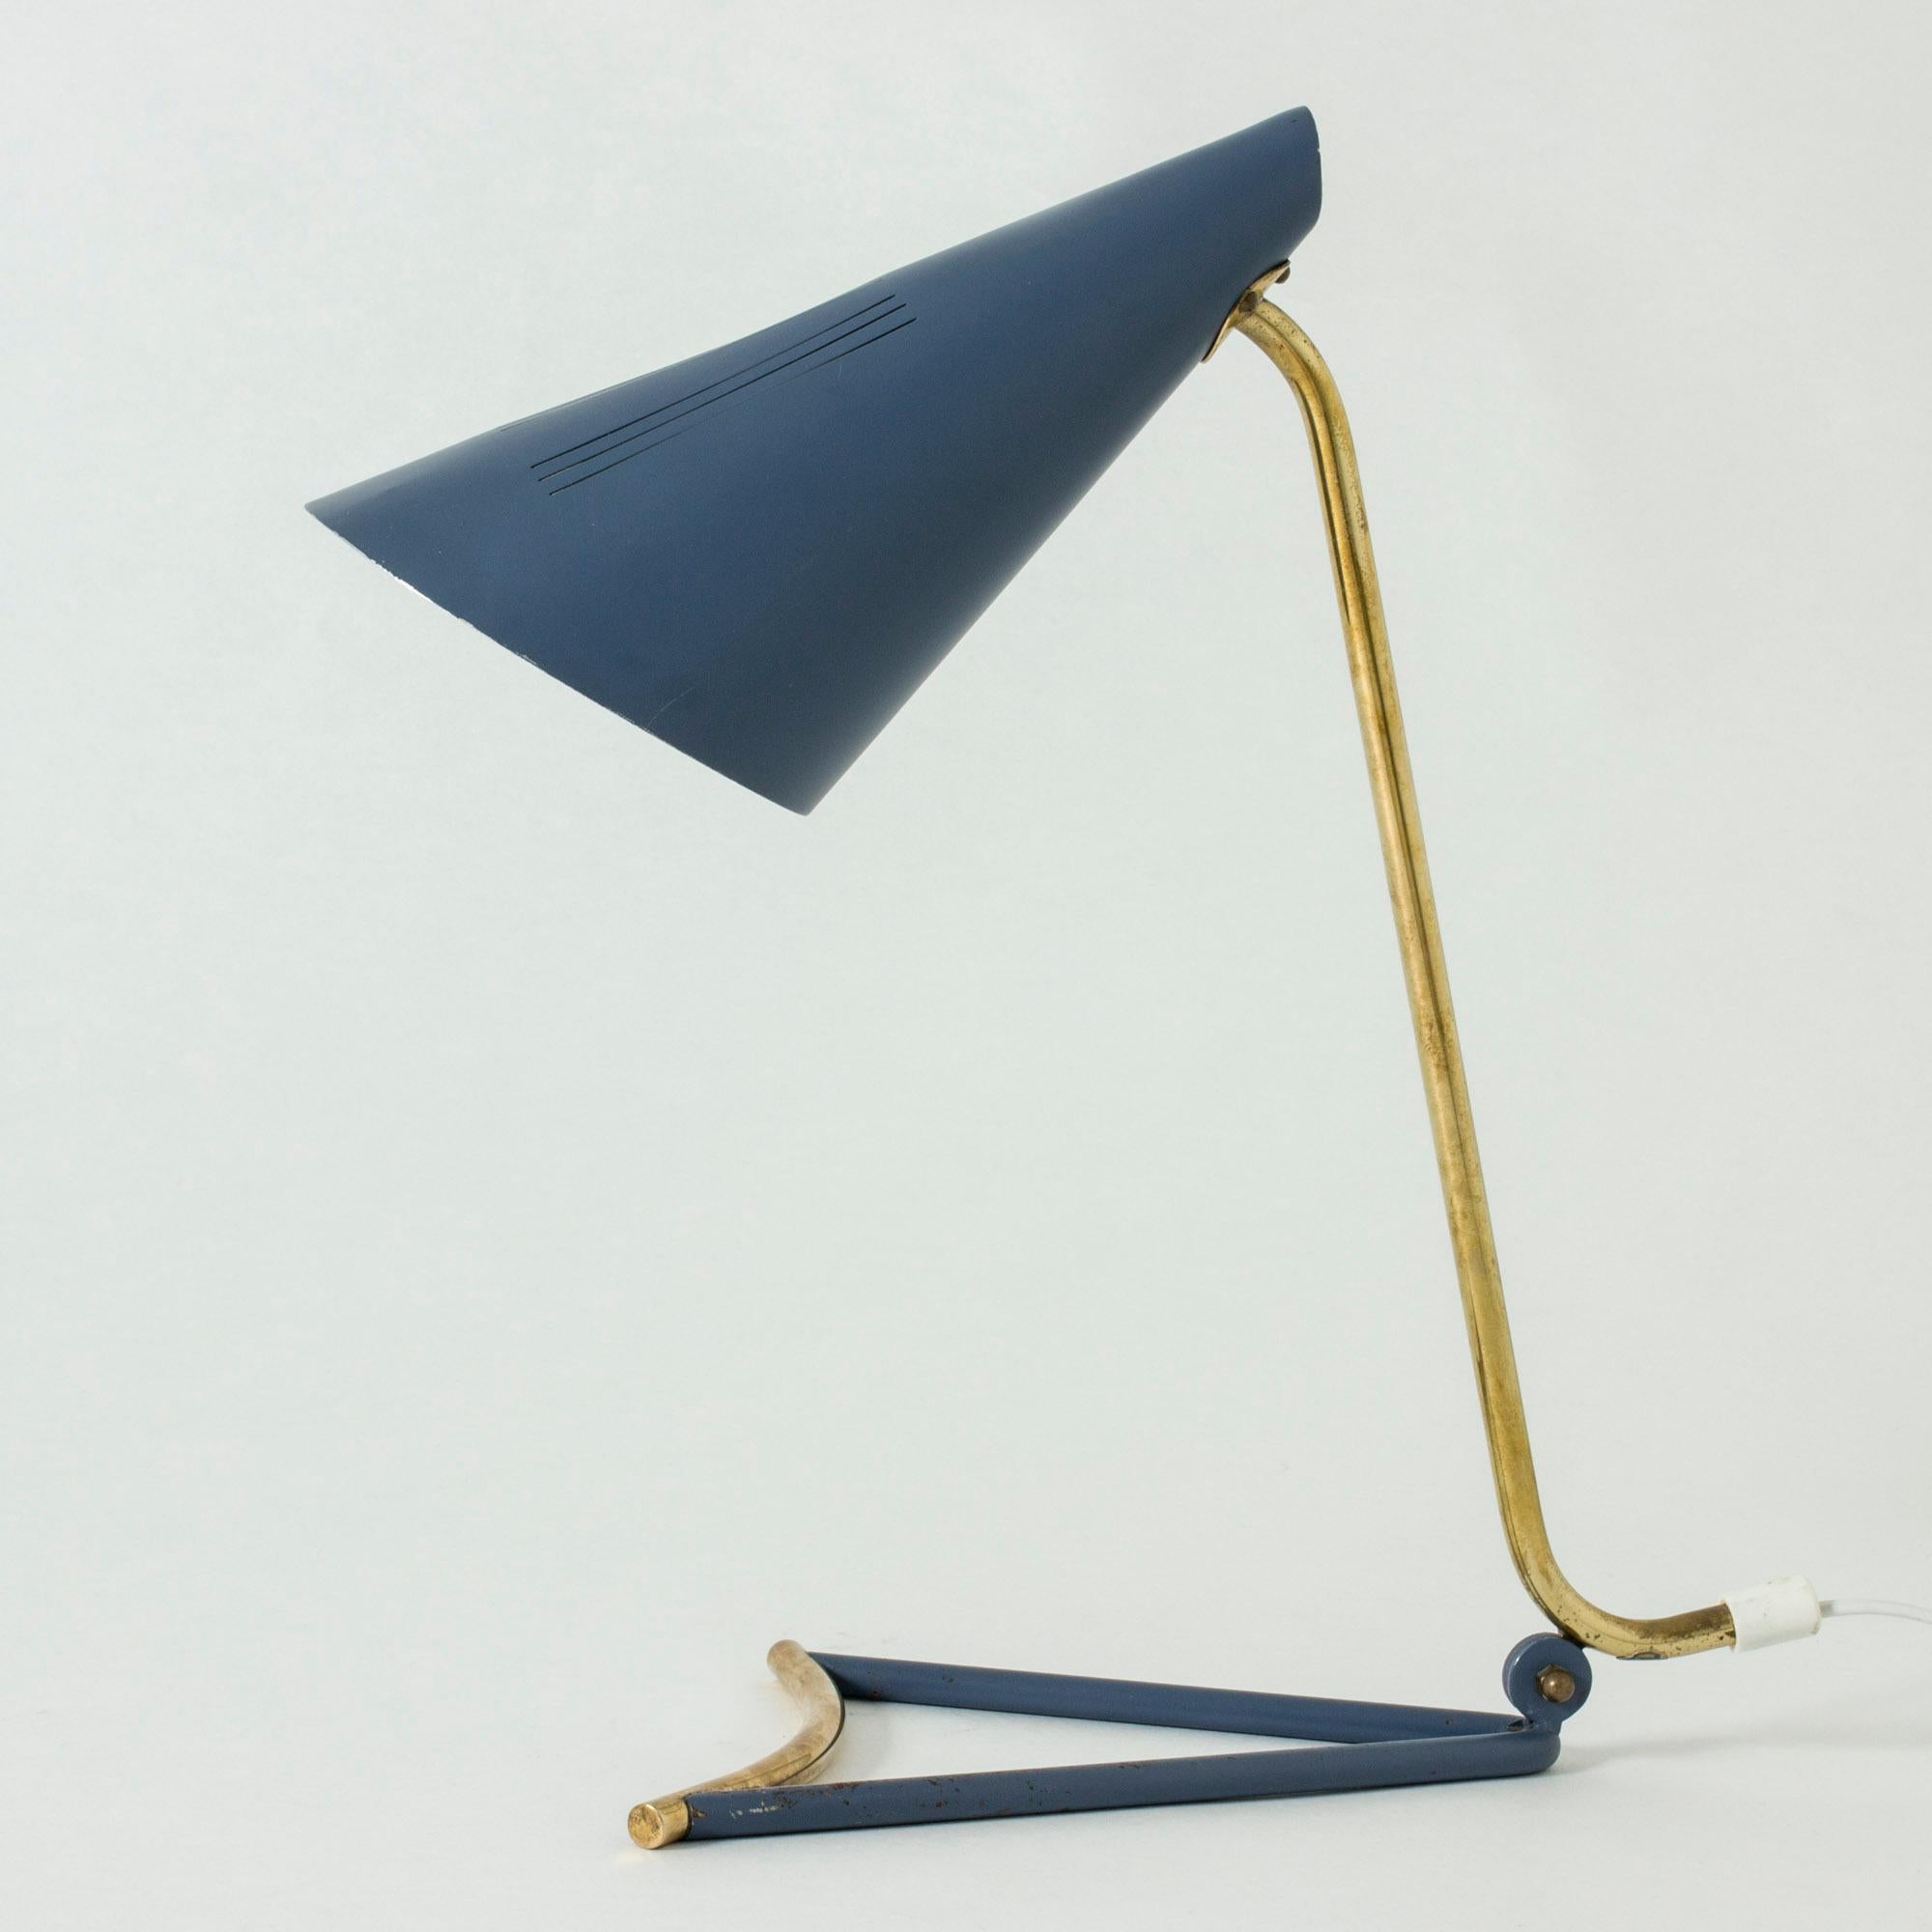 Very cool lacquered metal table lamp by Knud Joos, with an elegantly skewed, open base. The muted blue contrasts nicely with the brass details.